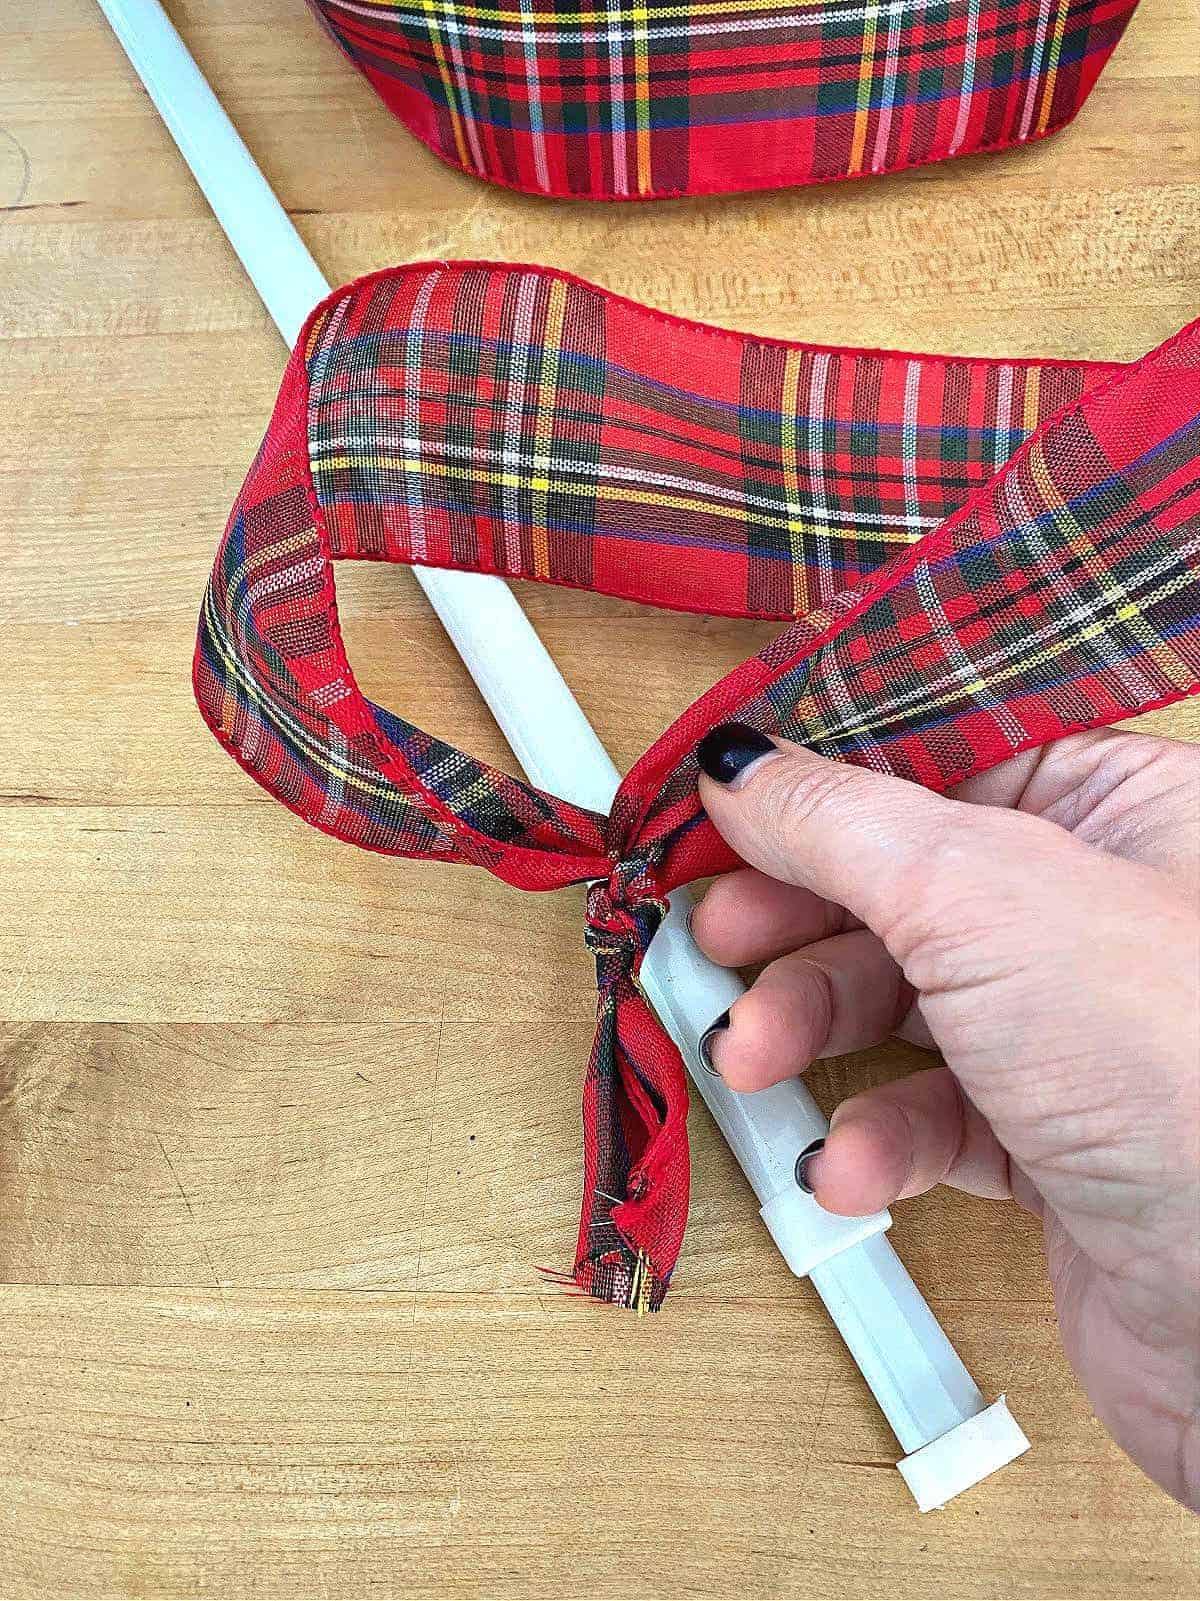 tying red checked ribbon to hang a wreath